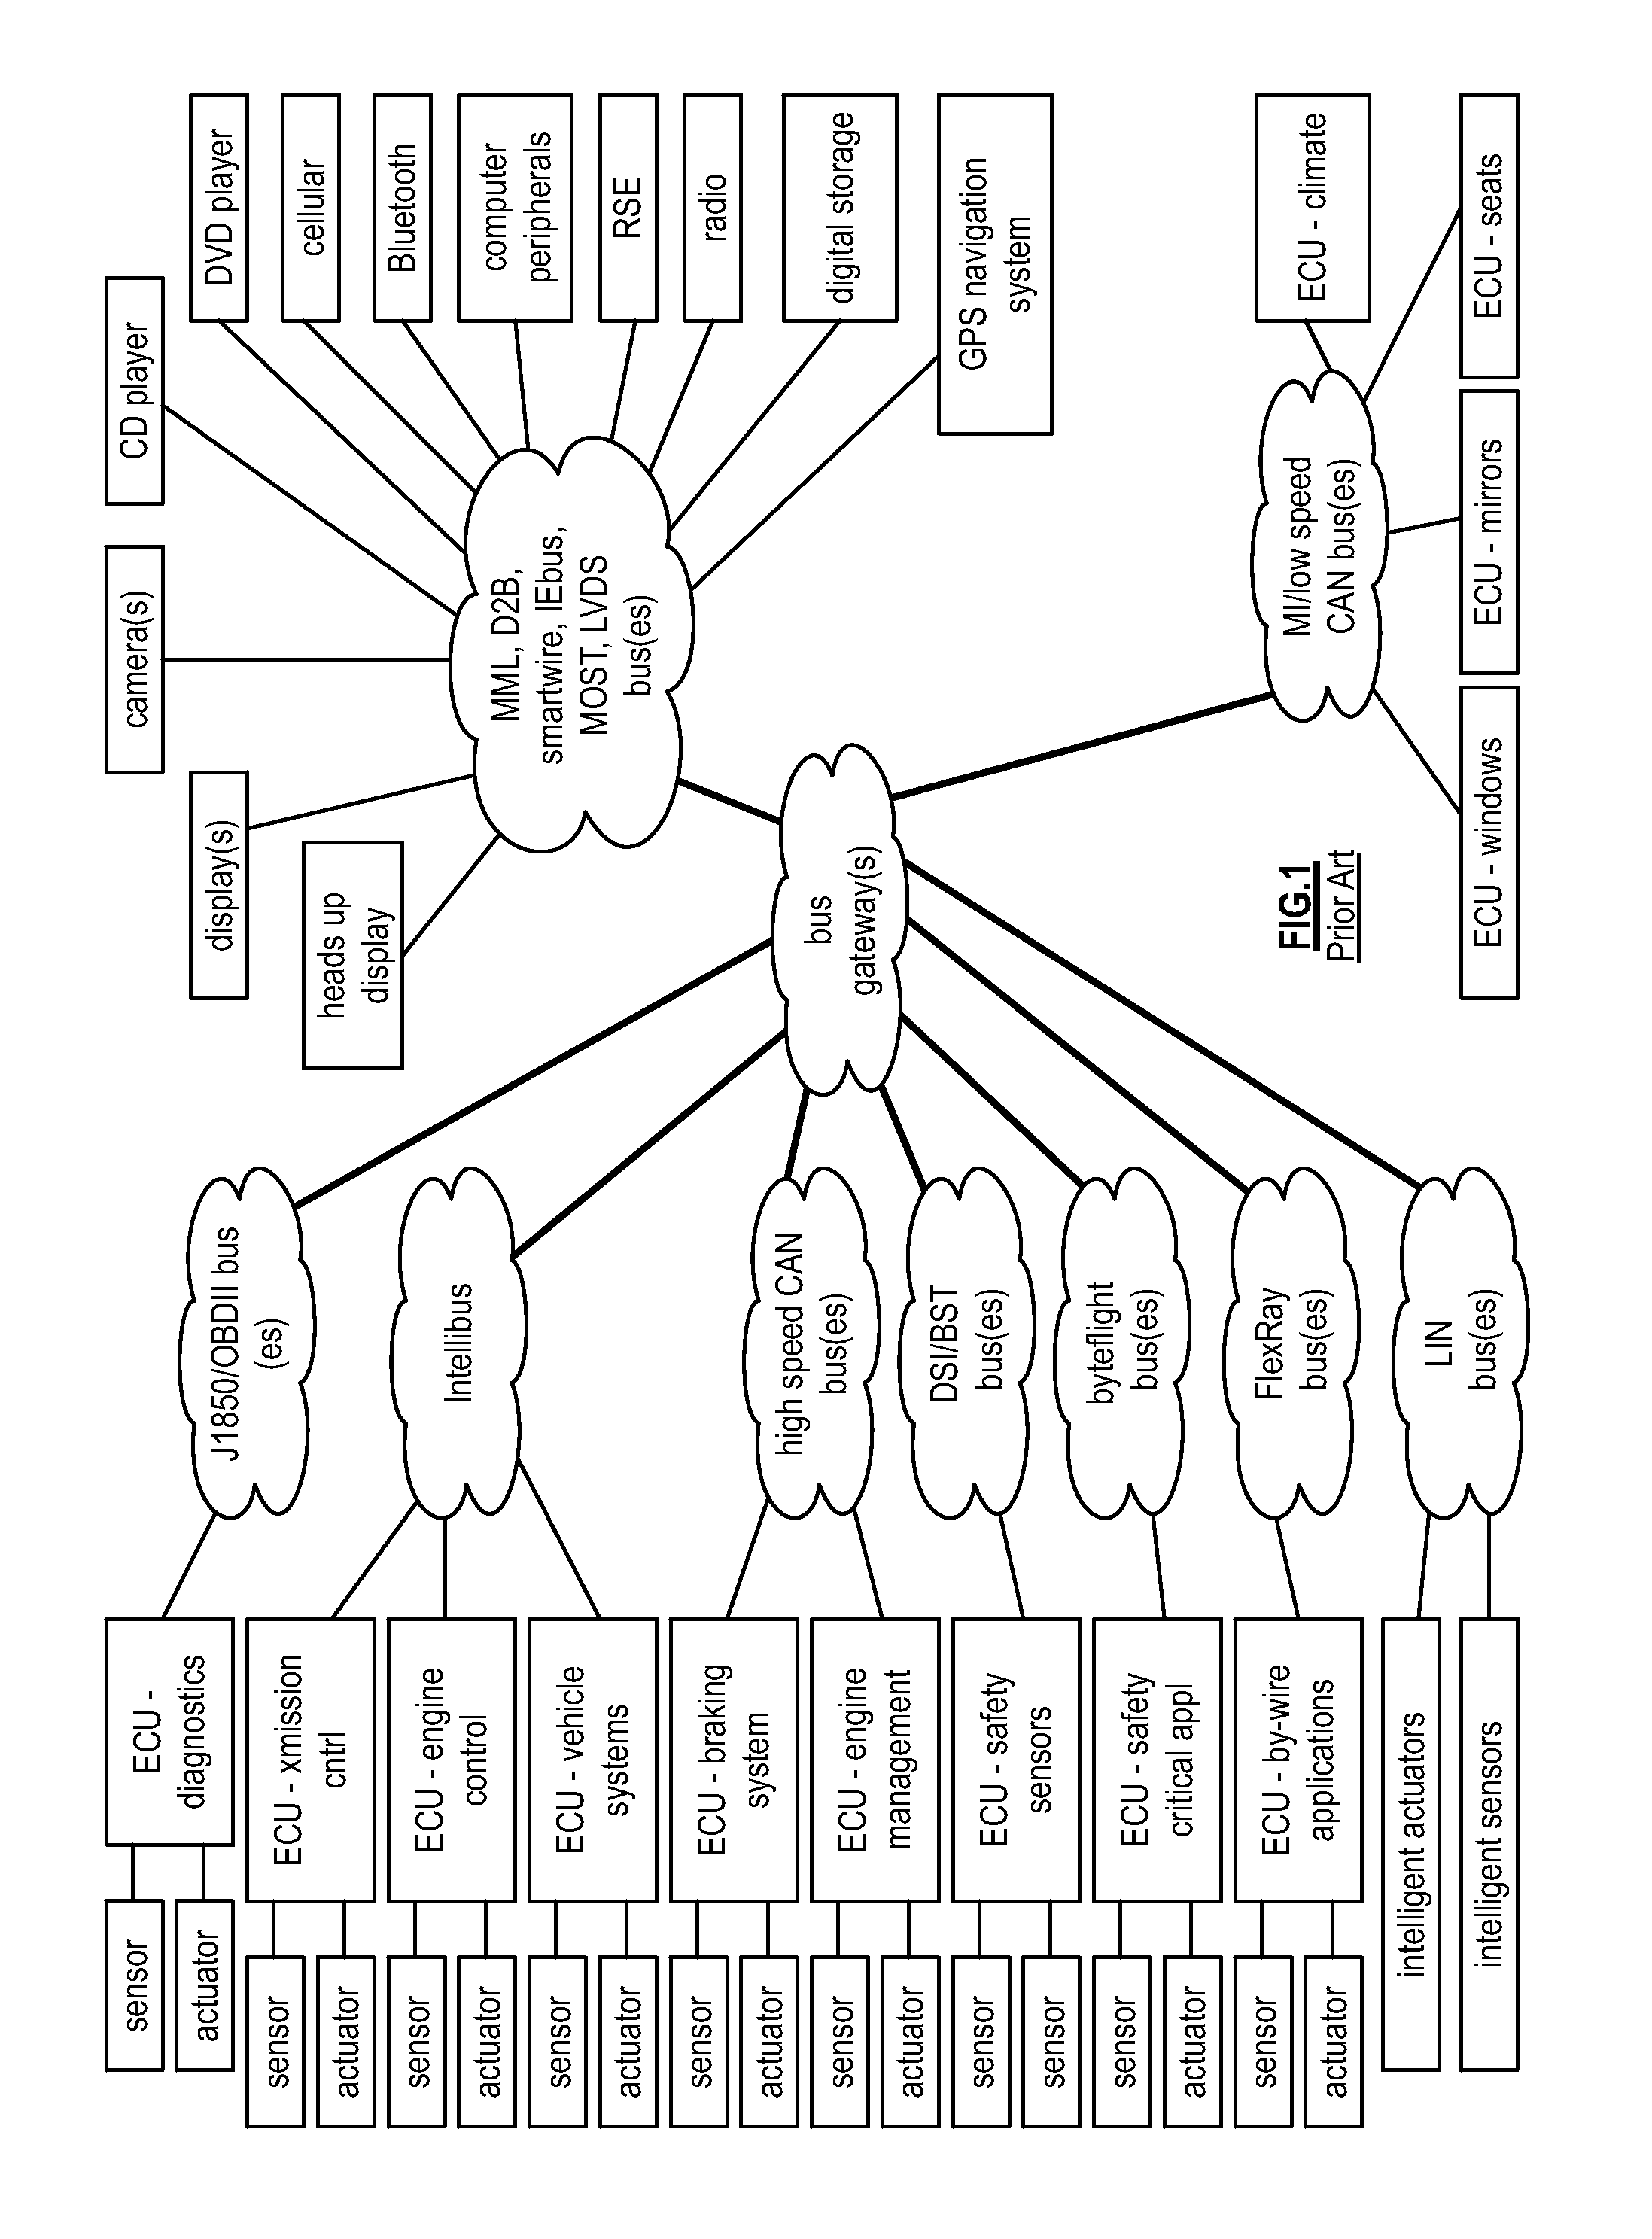 Providing power over ethernet within a vehicular communication network